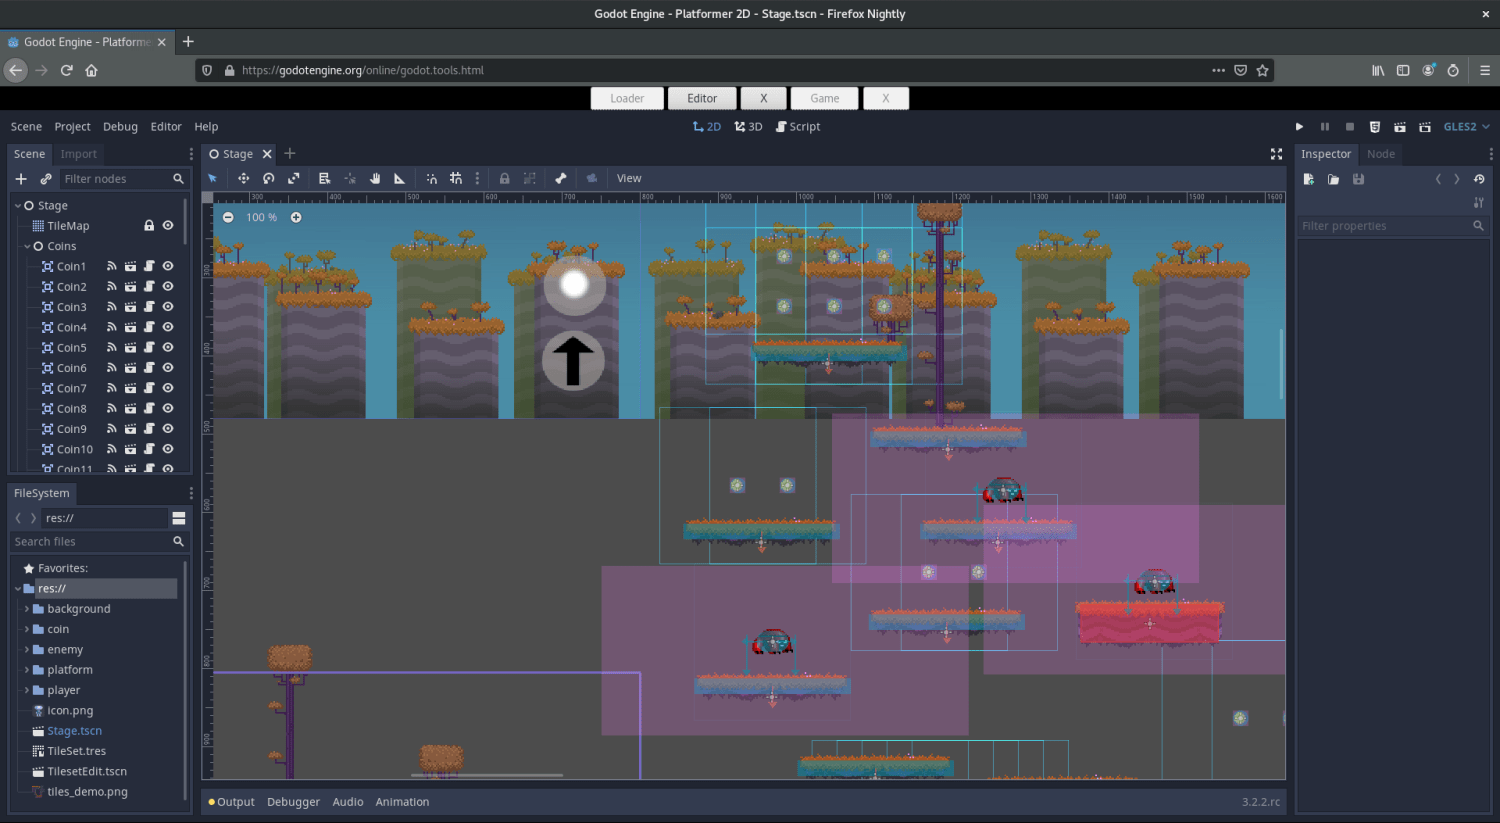 Godot Editor running in a web browser